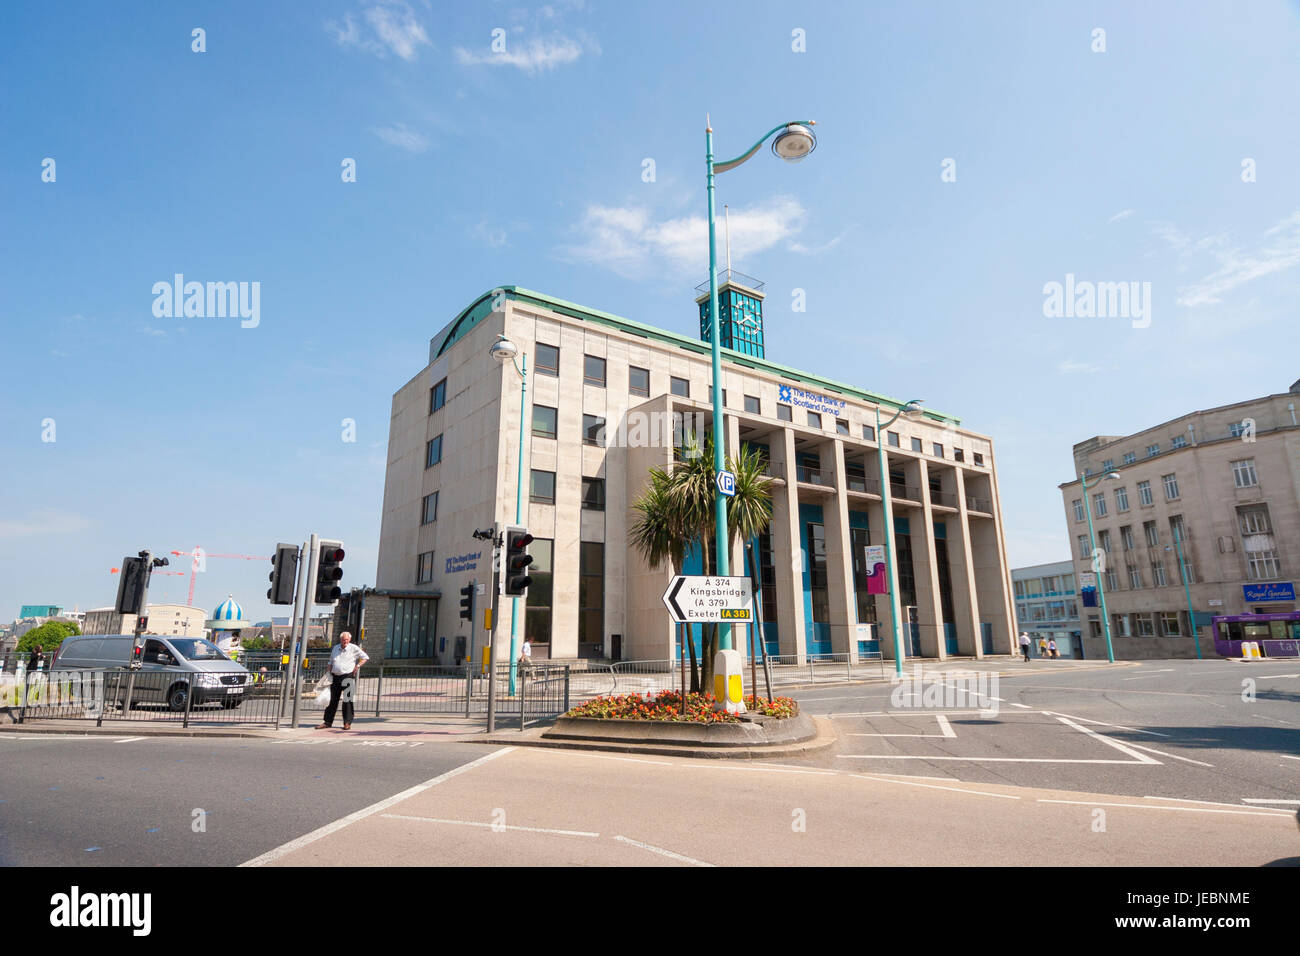 The Royal Bank Of Scotland building at St Andrew's Cross Roundabout in Plymouth,Grade ll listed, Sunny summer. Devon, England, United Kingdon, UK Stock Photo